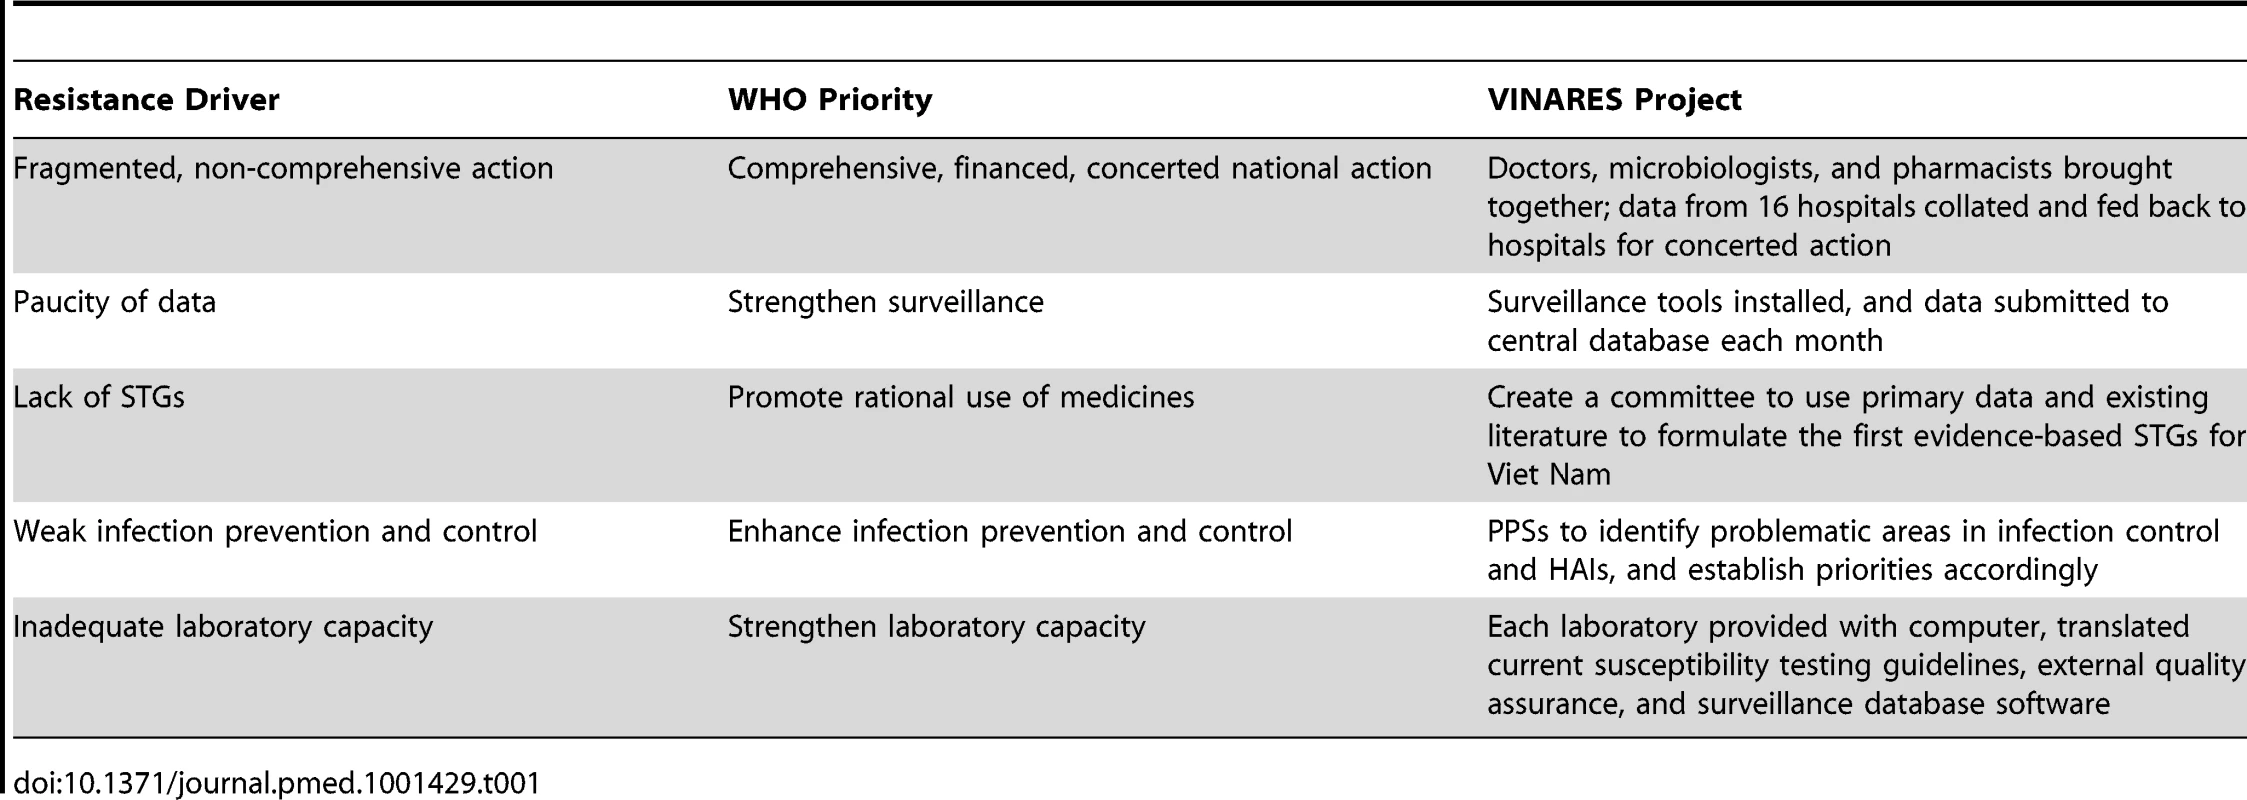 Drivers of antibiotic resistance, hospital-related WHO policy package priorities, and how these are met by the VINARES project &lt;em class=&quot;ref&quot;&gt;[10]&lt;/em&gt;.